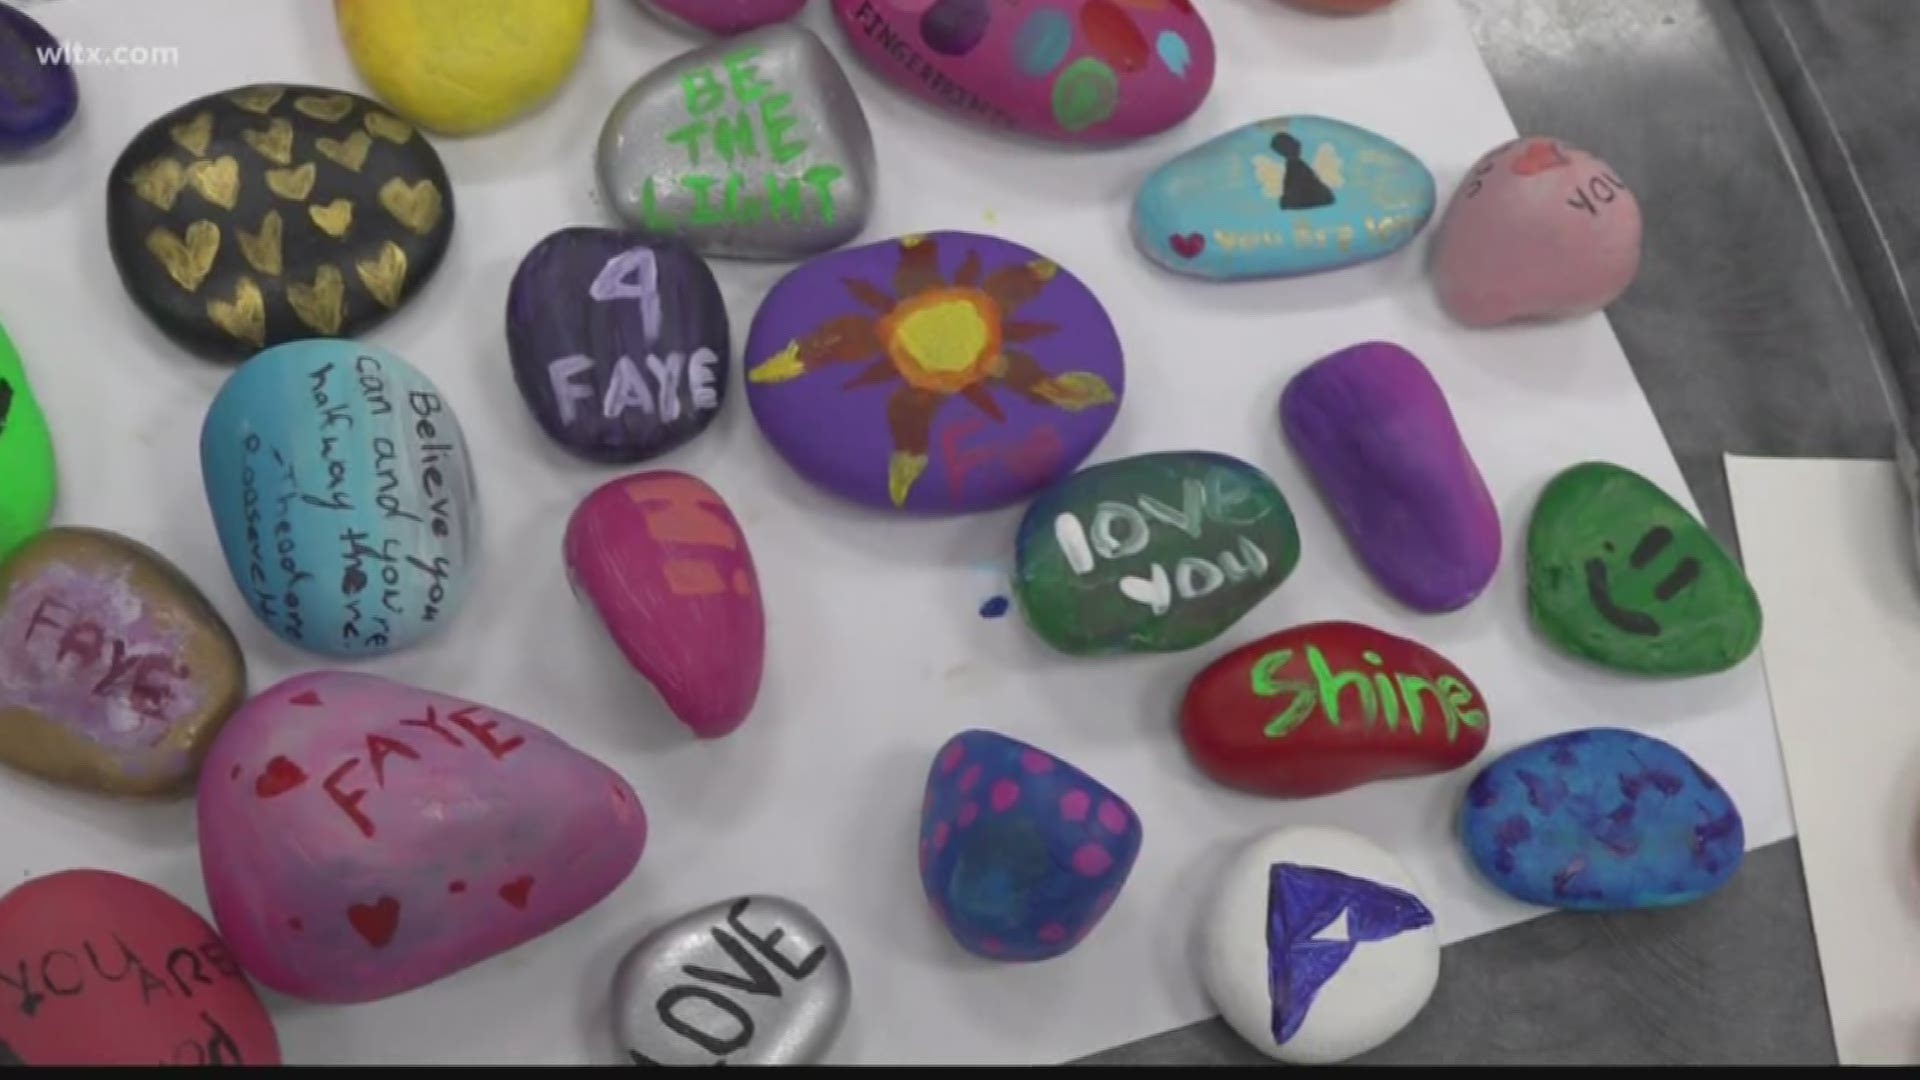 Students at Airport High School find a way to honor Faye Swetlik